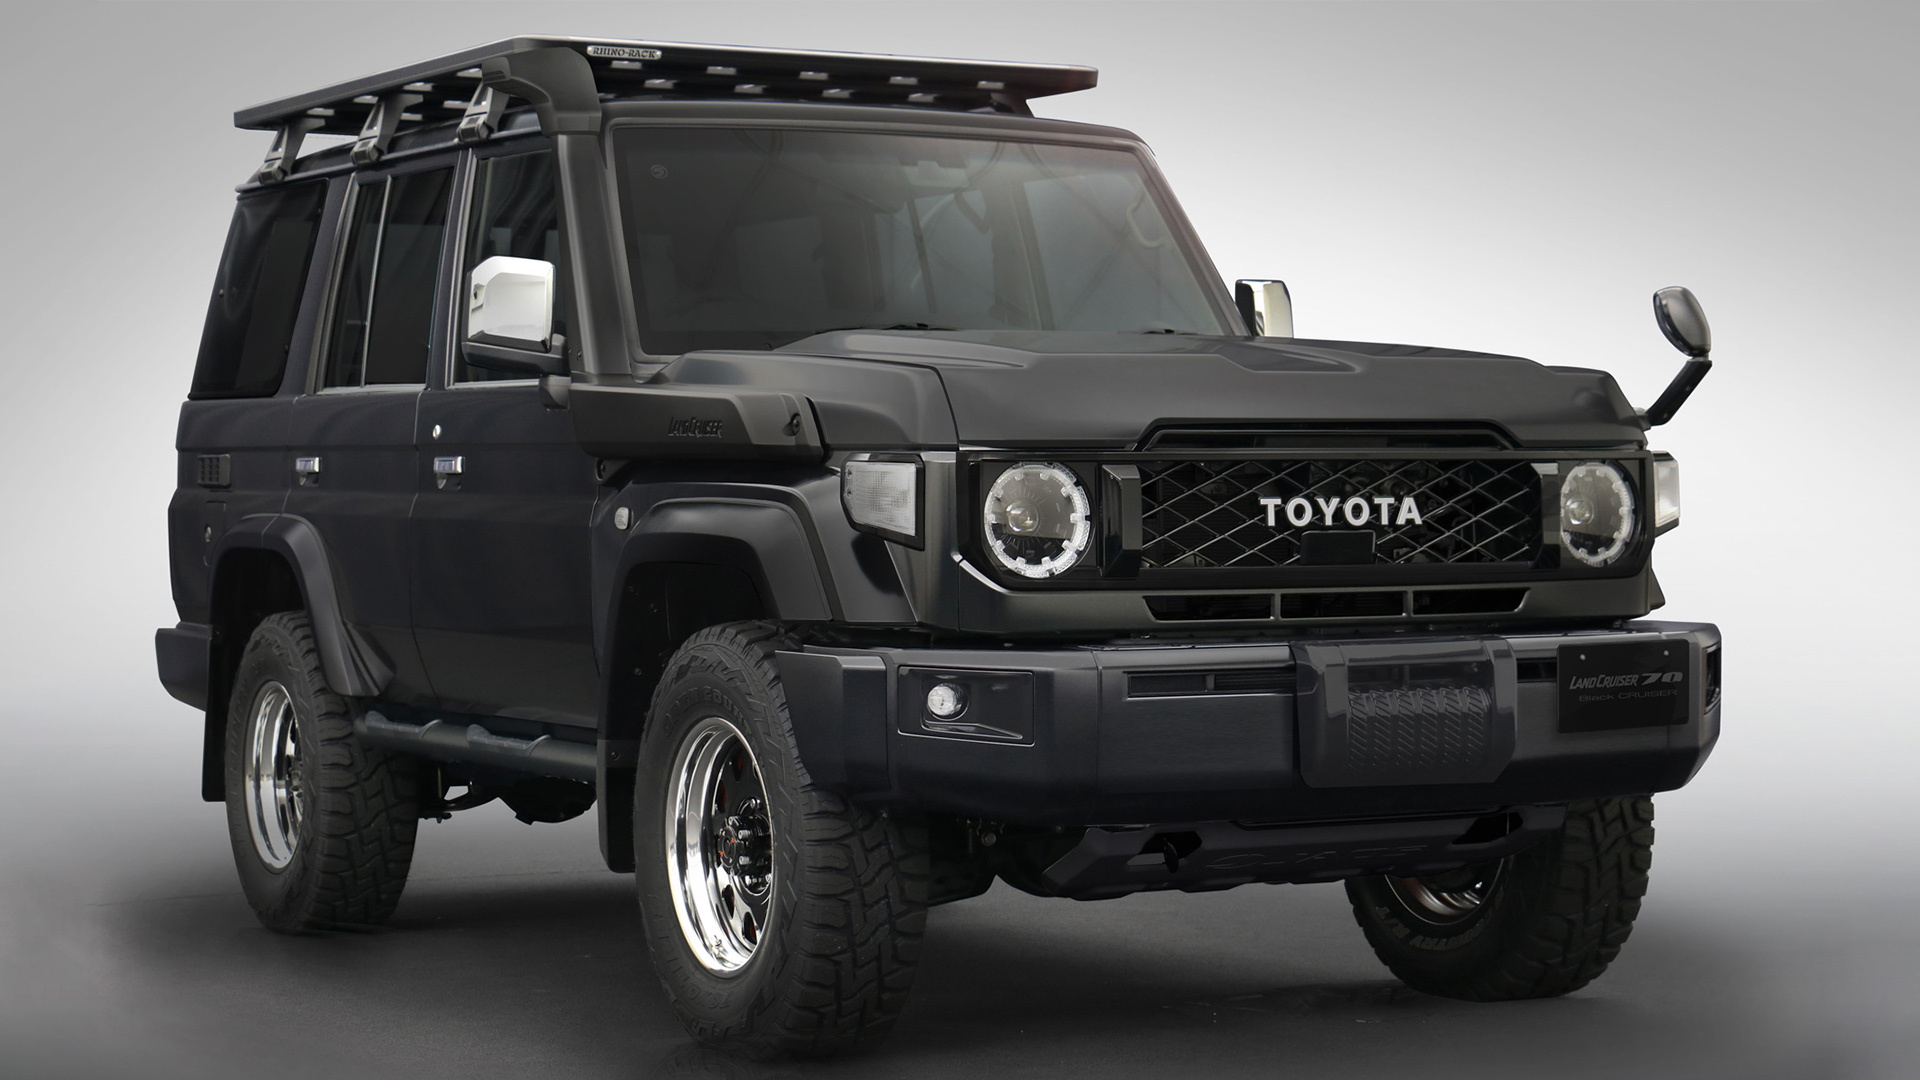 Matte Black Toyota Land Cruiser 70 Is Coming To The Tokyo Auto Salon